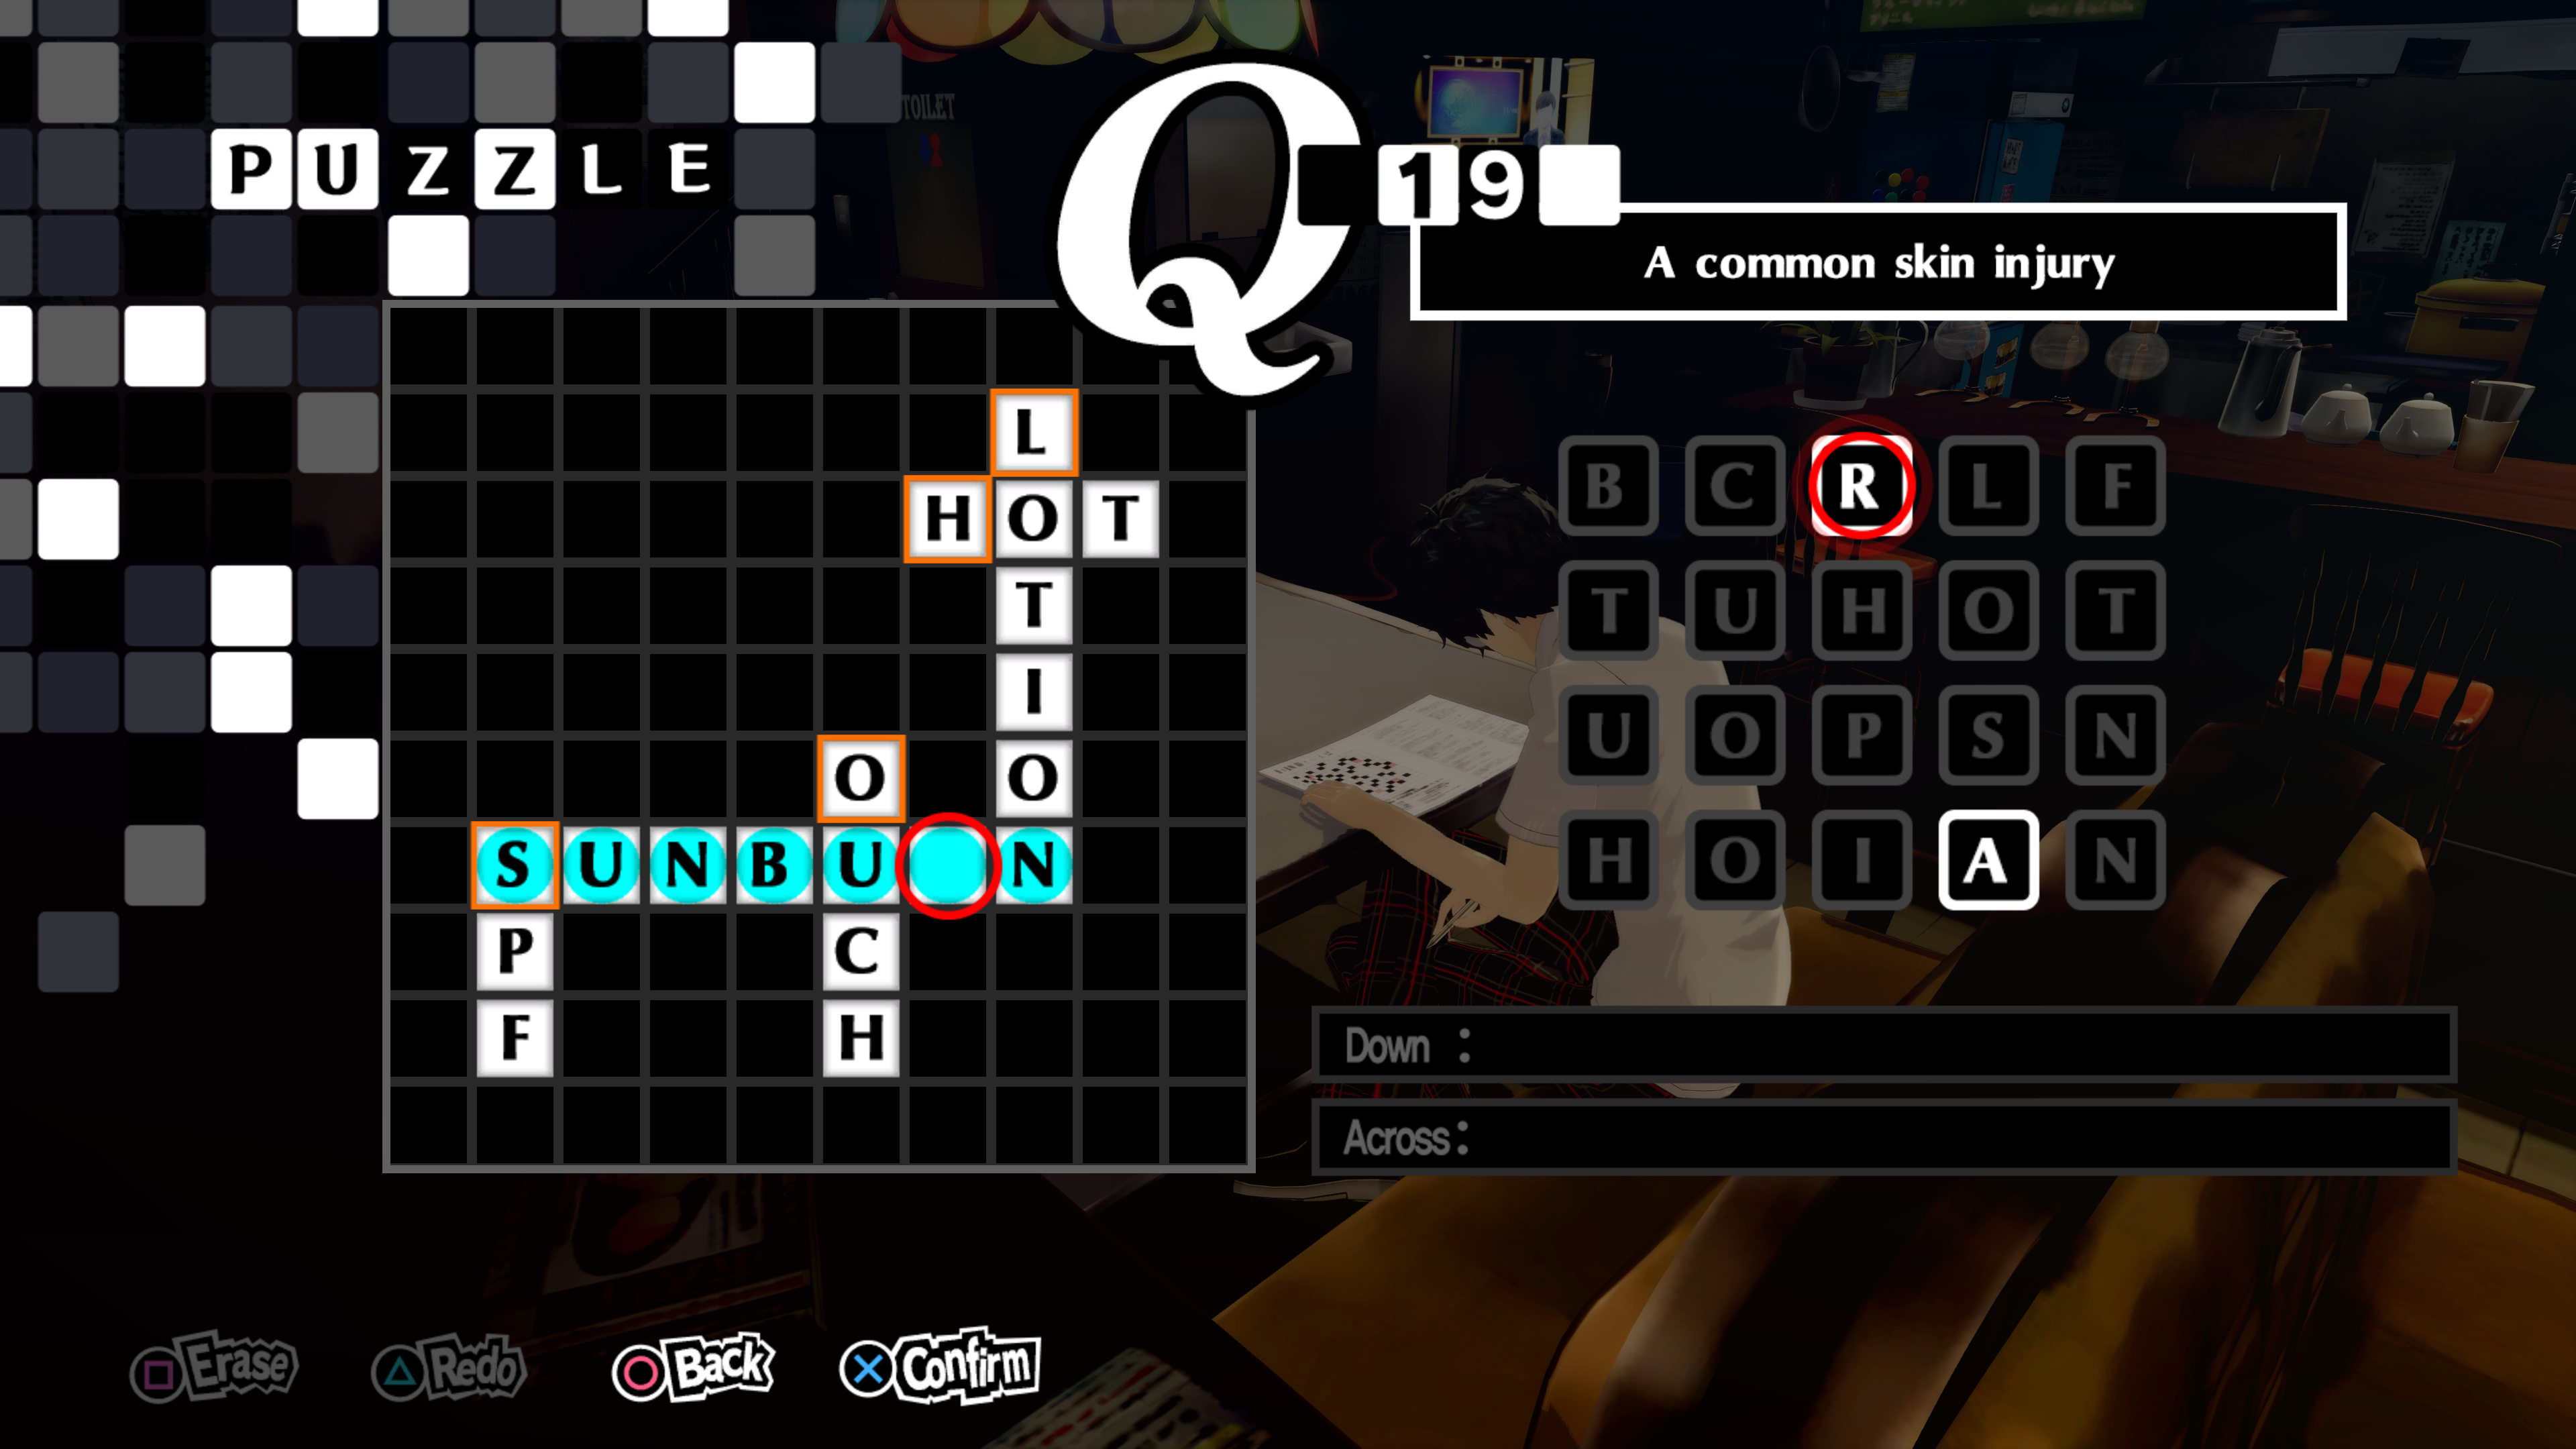 Persona 5 Royal Crossword Answers All Crossword Puzzles Solved